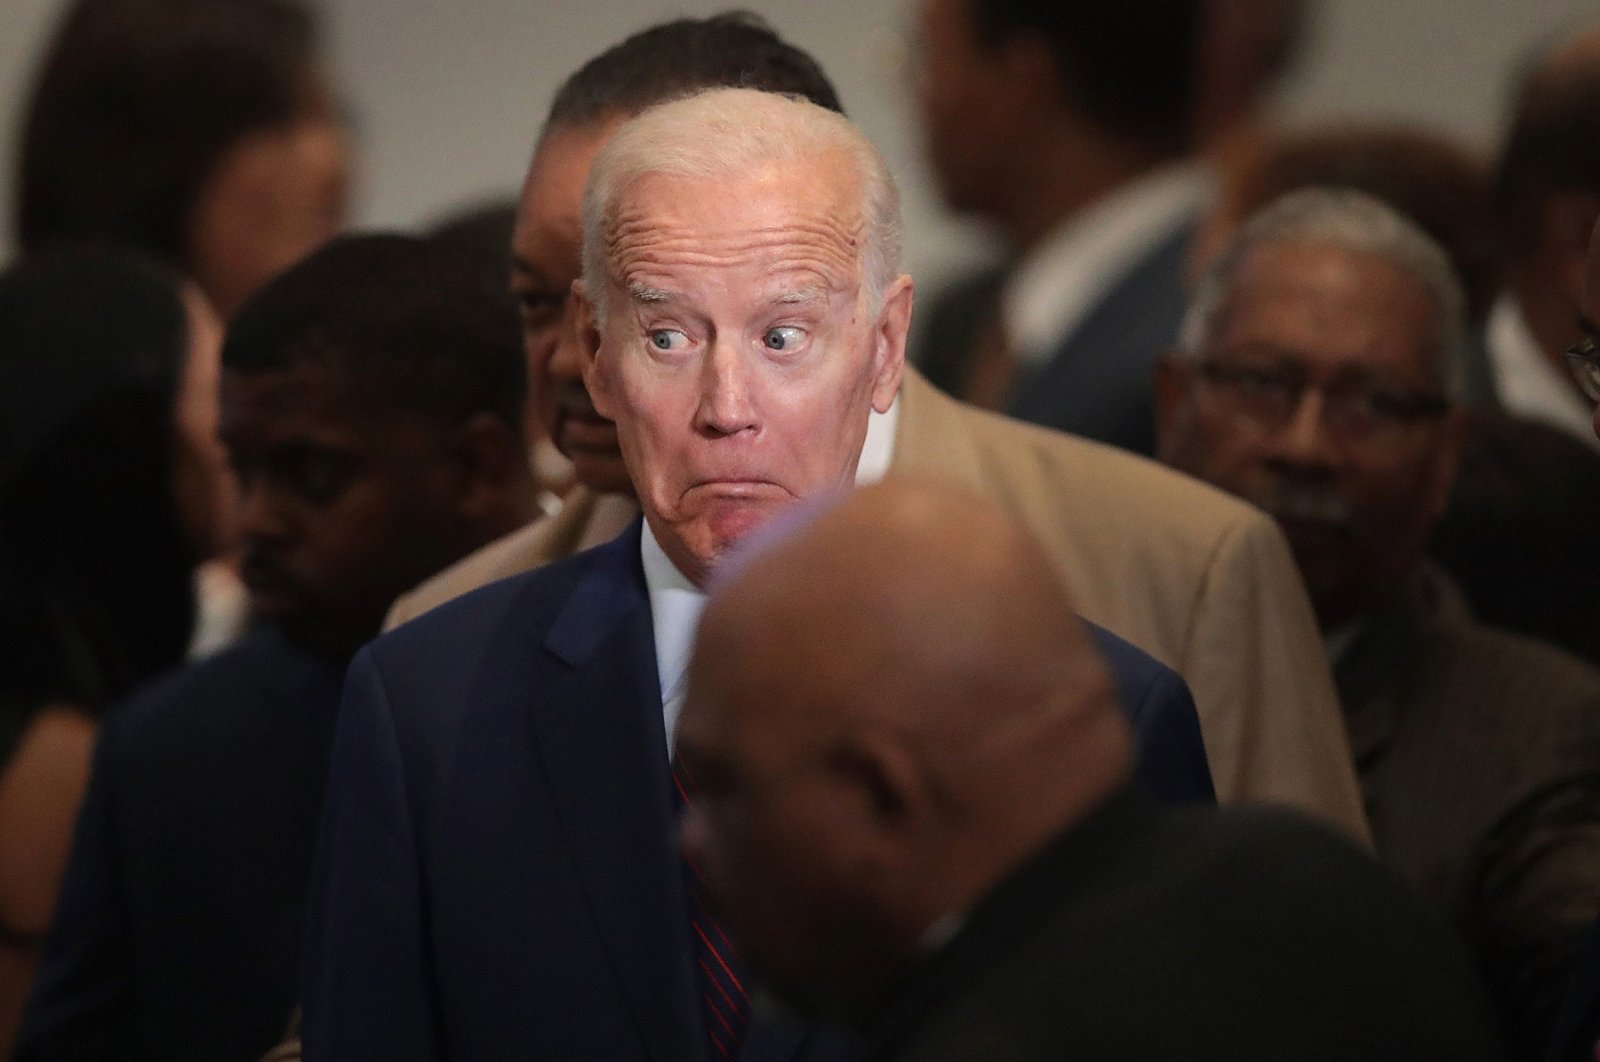 Joe Biden during an election convention in Chicago, Illinois, June 28, 2019. (Getty Images)